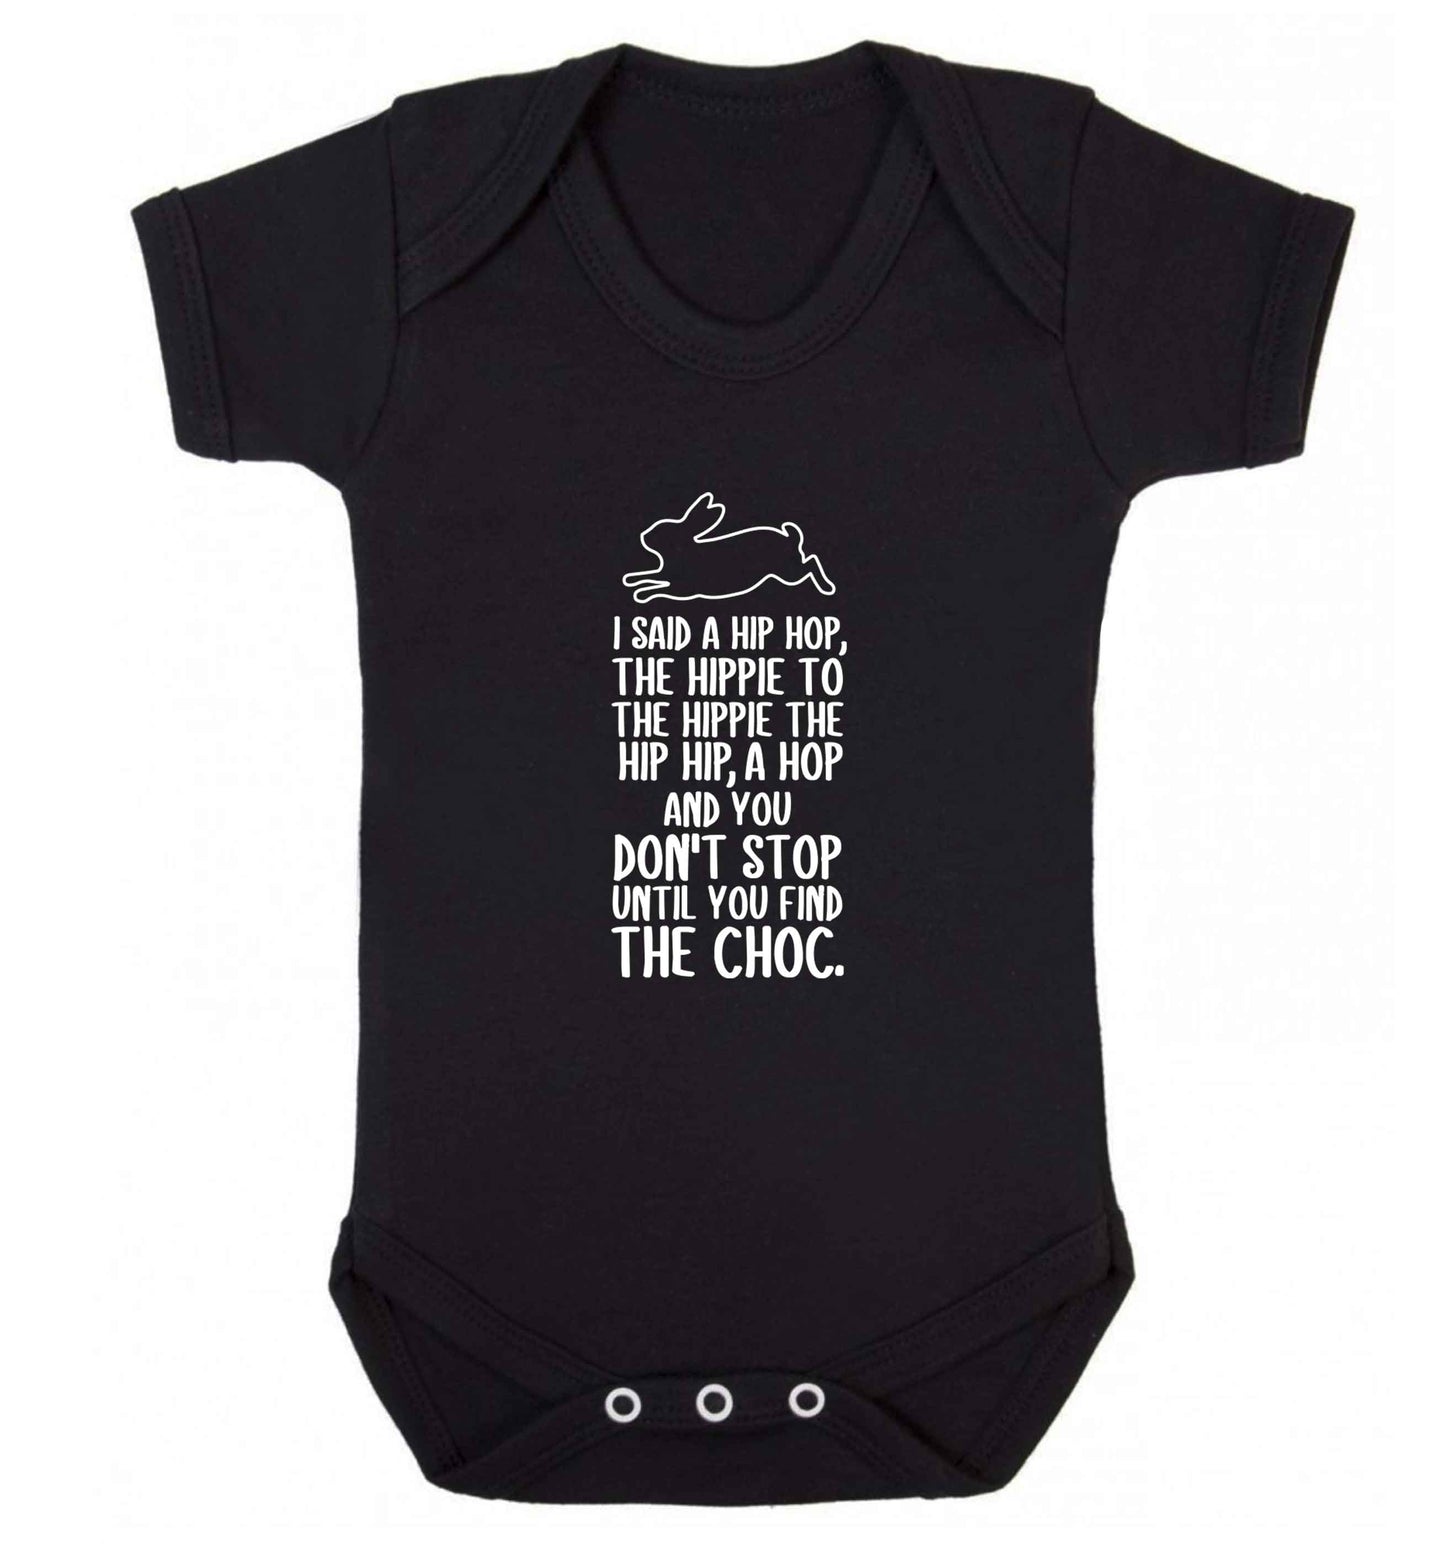 Don't stop until you find the choc baby vest black 18-24 months